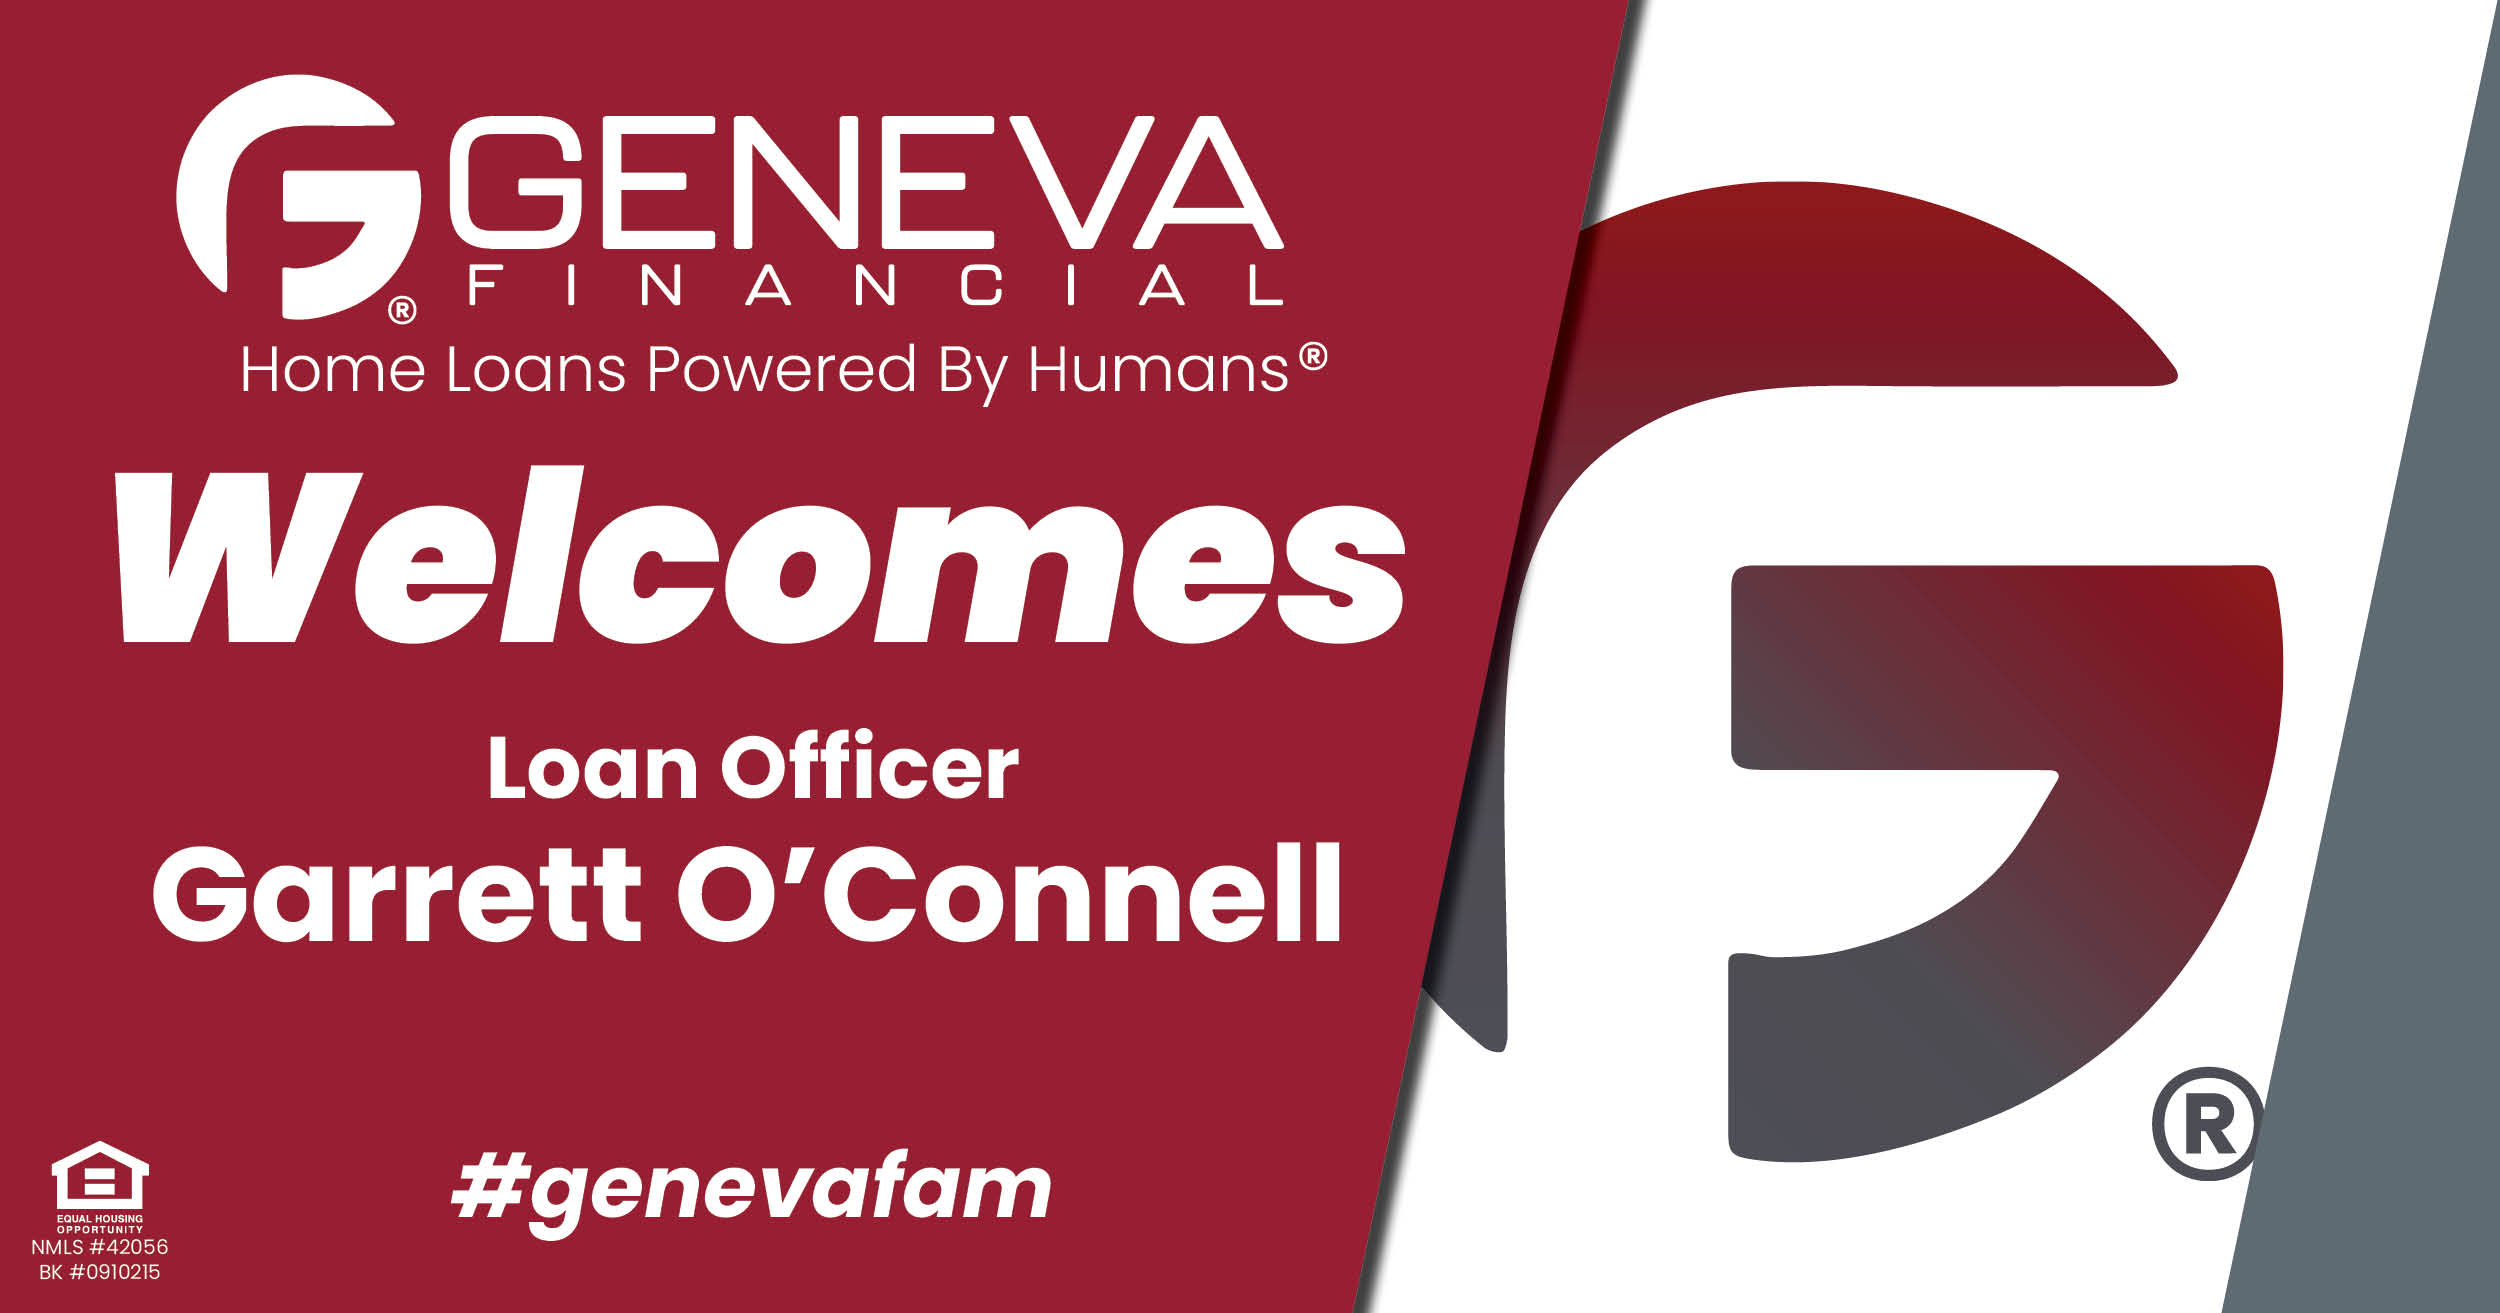 Geneva Financial Welcomes New Loan Officer Garrett O'Connell to Arnold, Missouri – Home Loans Powered by Humans®.